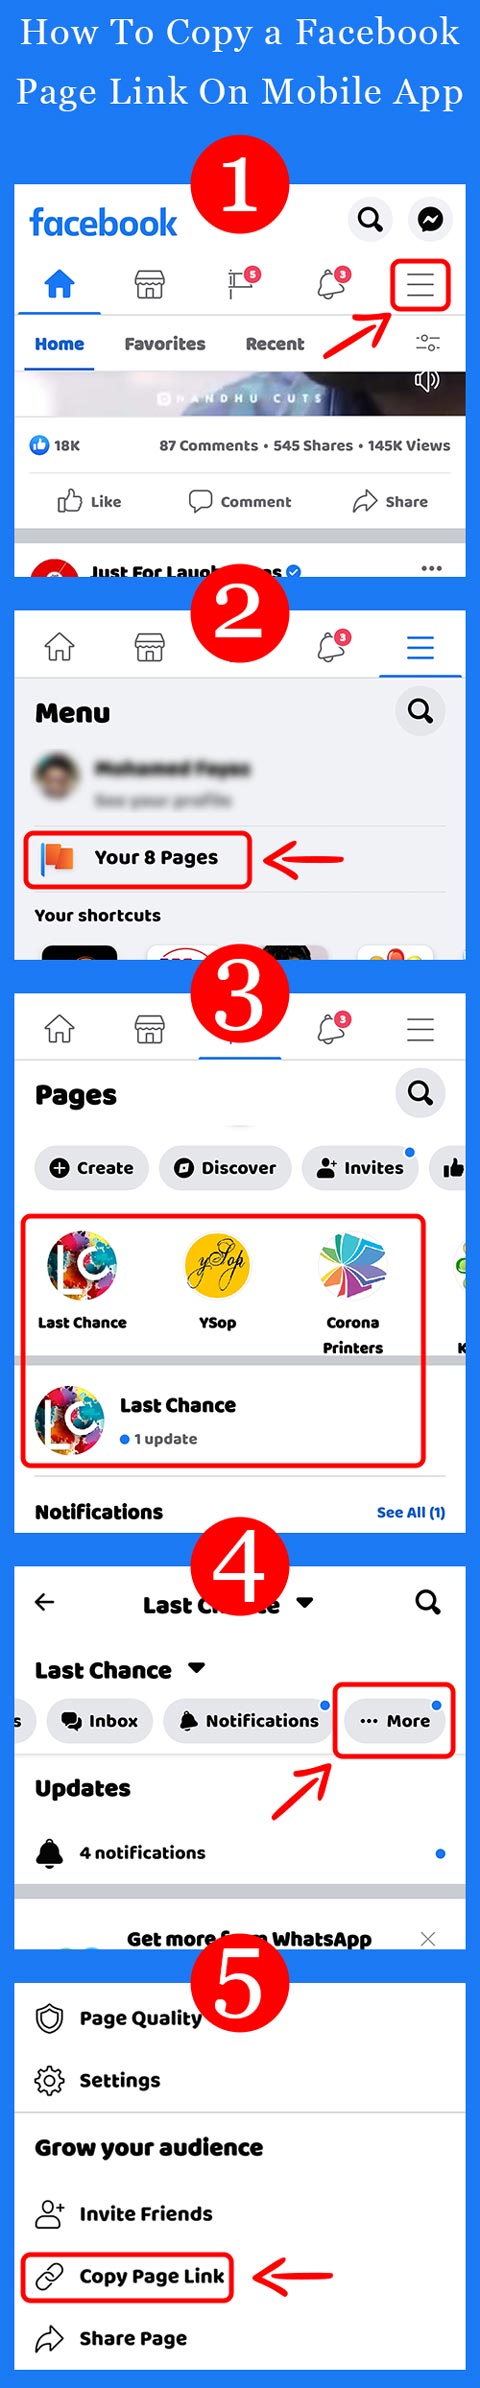 How to Copy Facebook Page Link on Facebook App